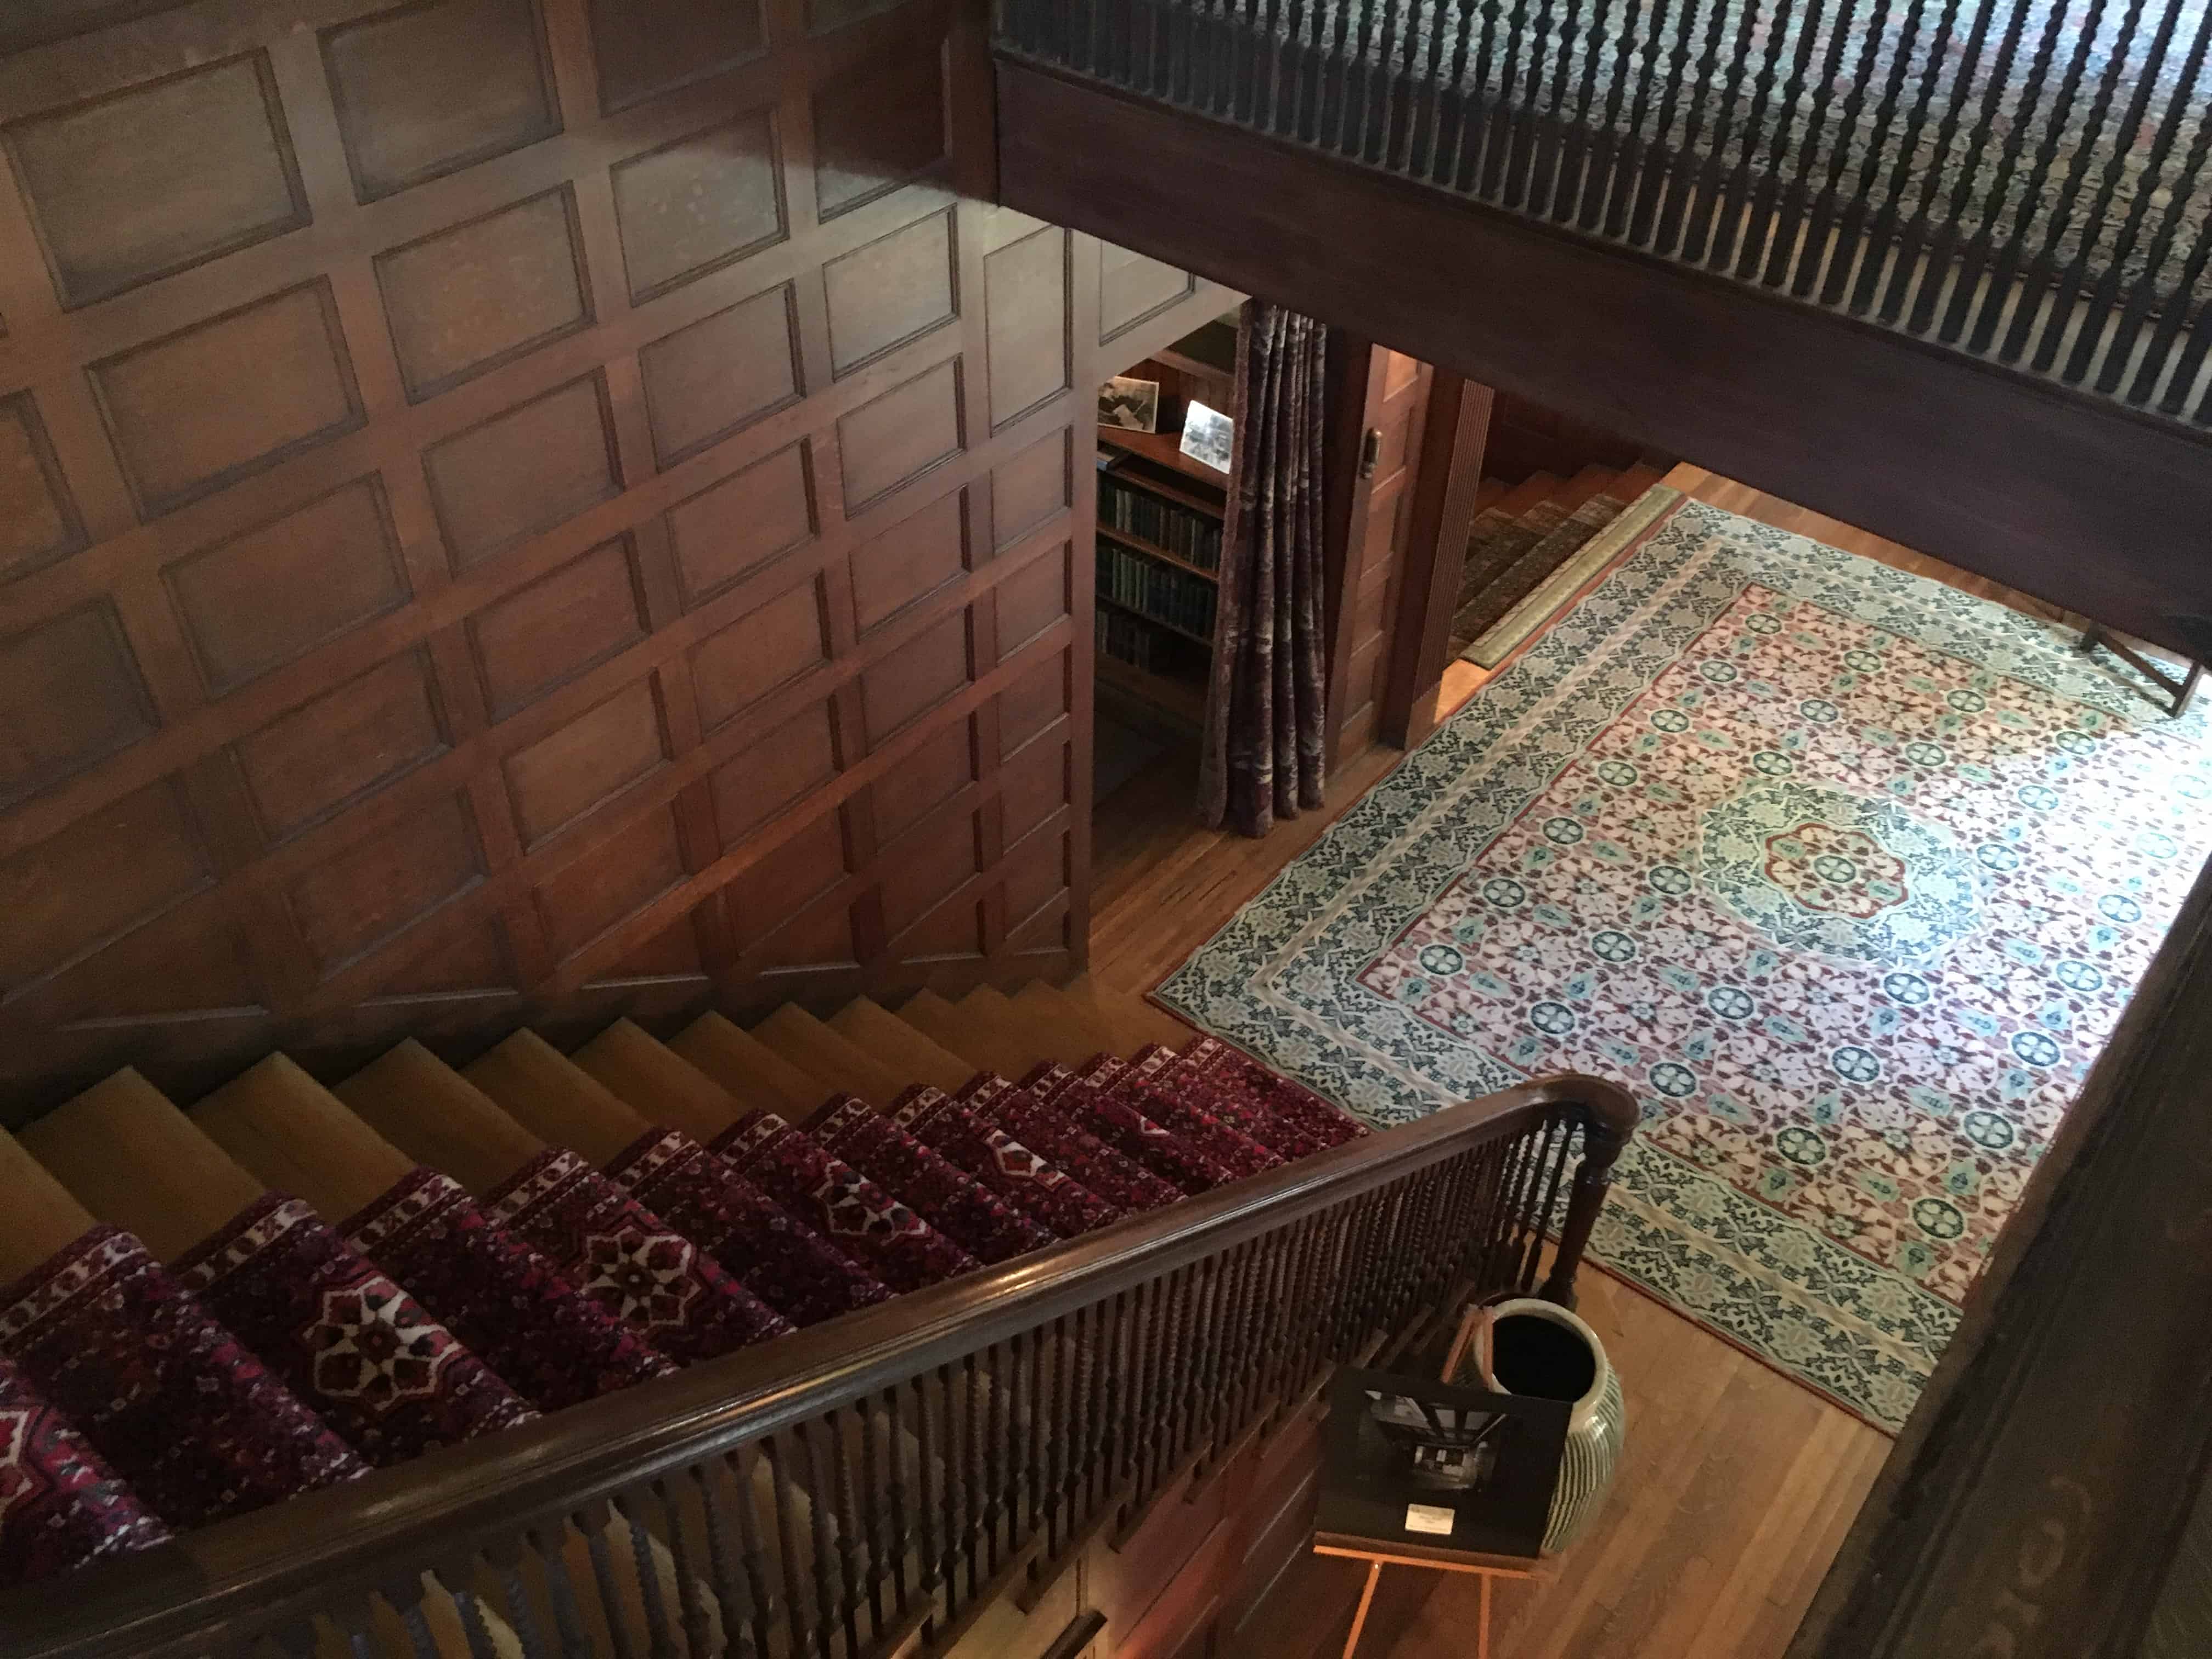 Stairway at the John J. Glessner House in Chicago, Illinois